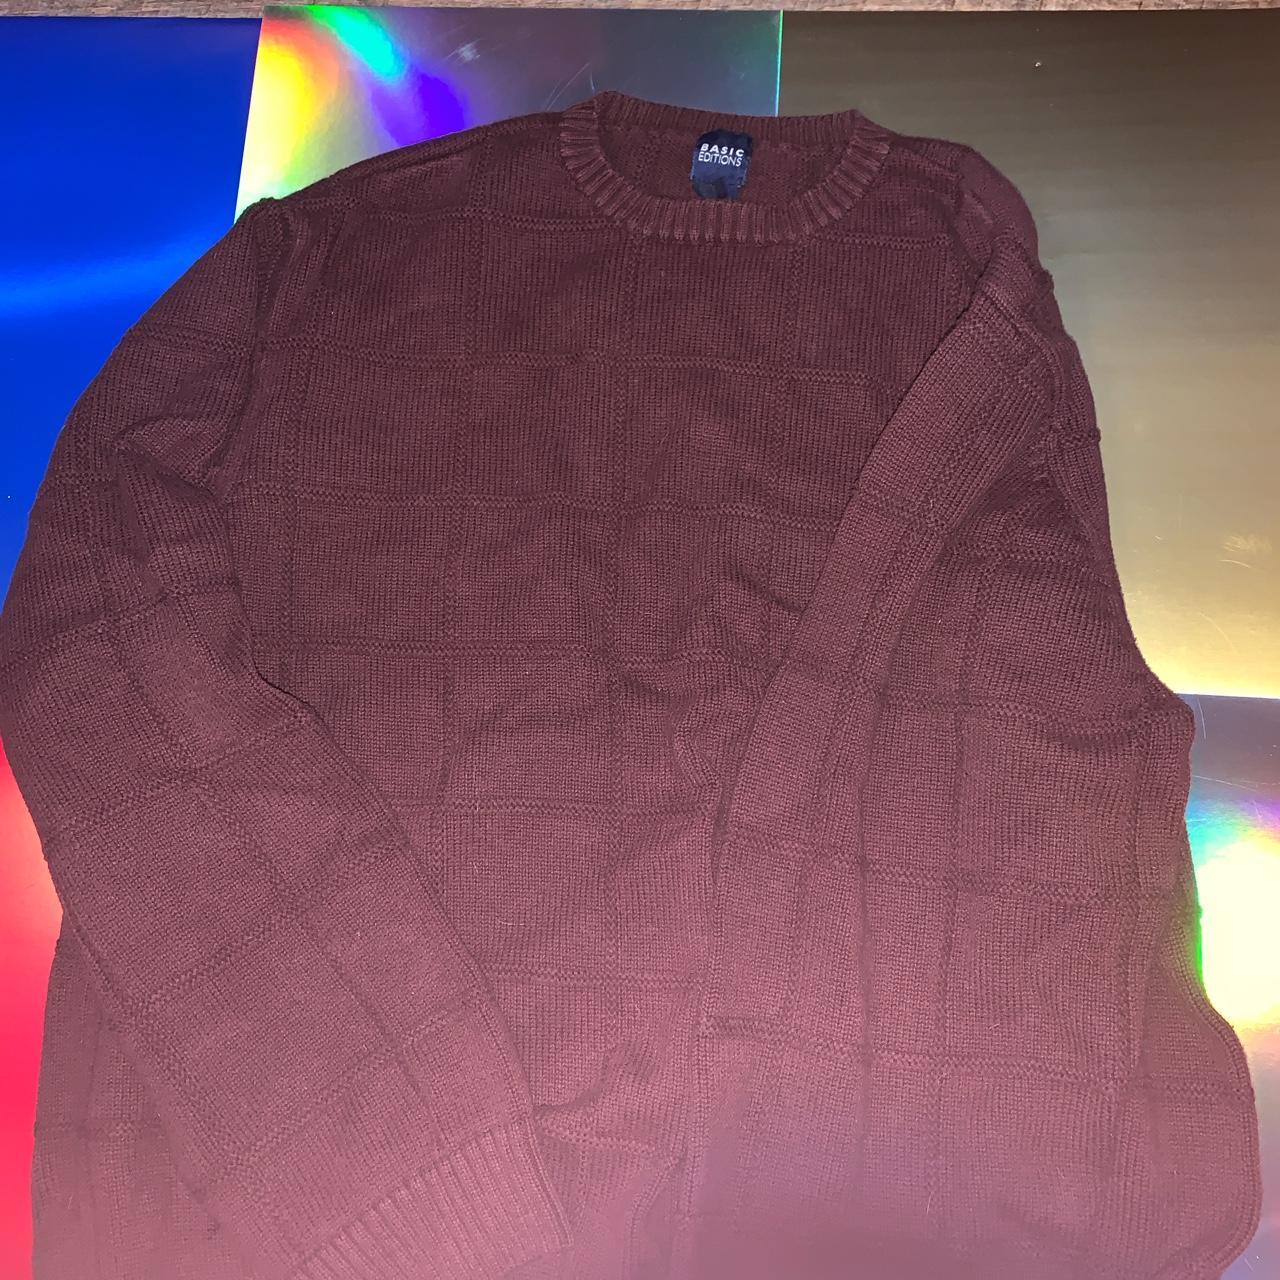 Basic Editions light chocolate sweater:) work once! - Depop